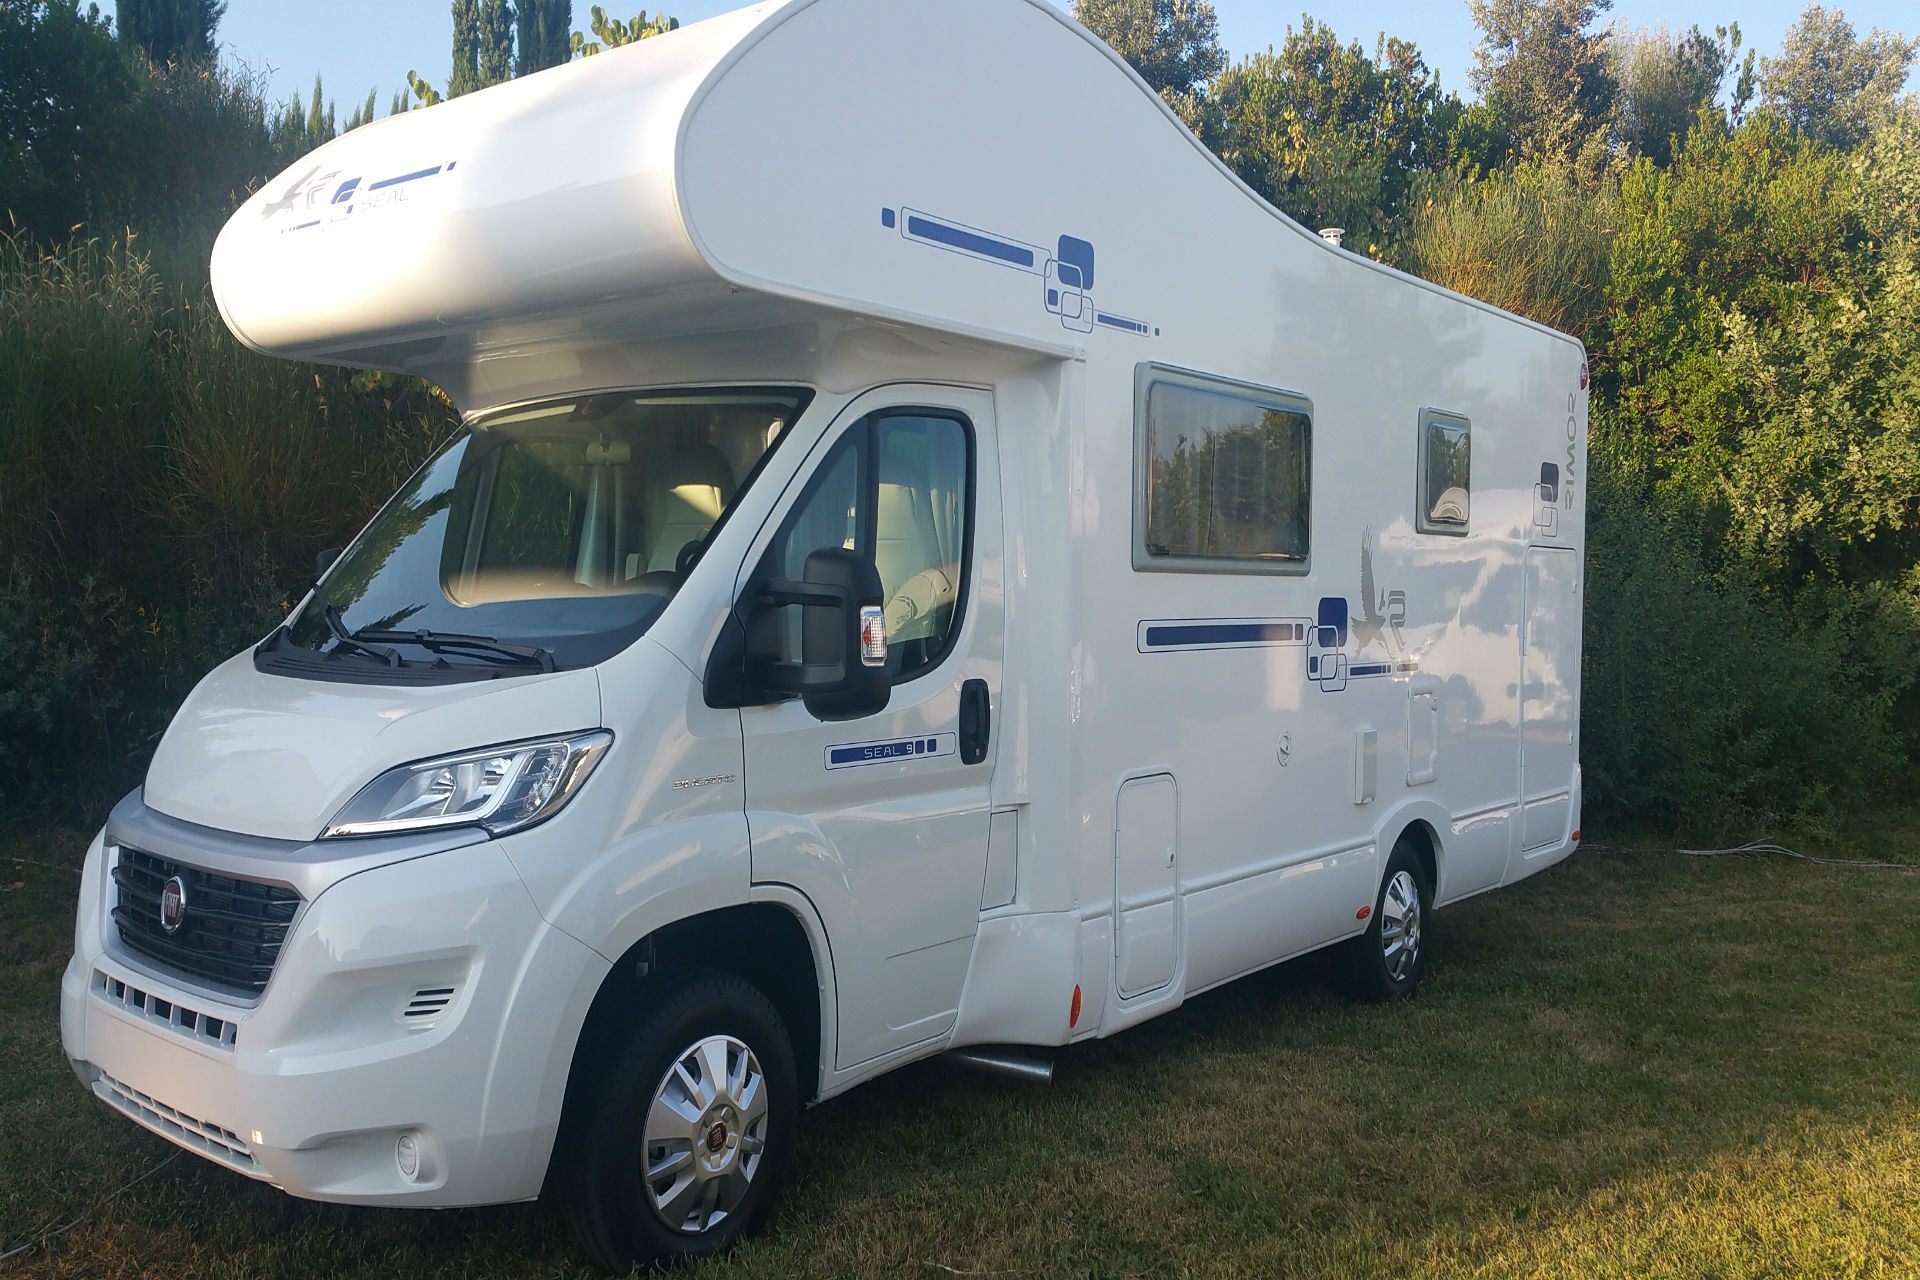 You Should Know While Buying A Motorhome